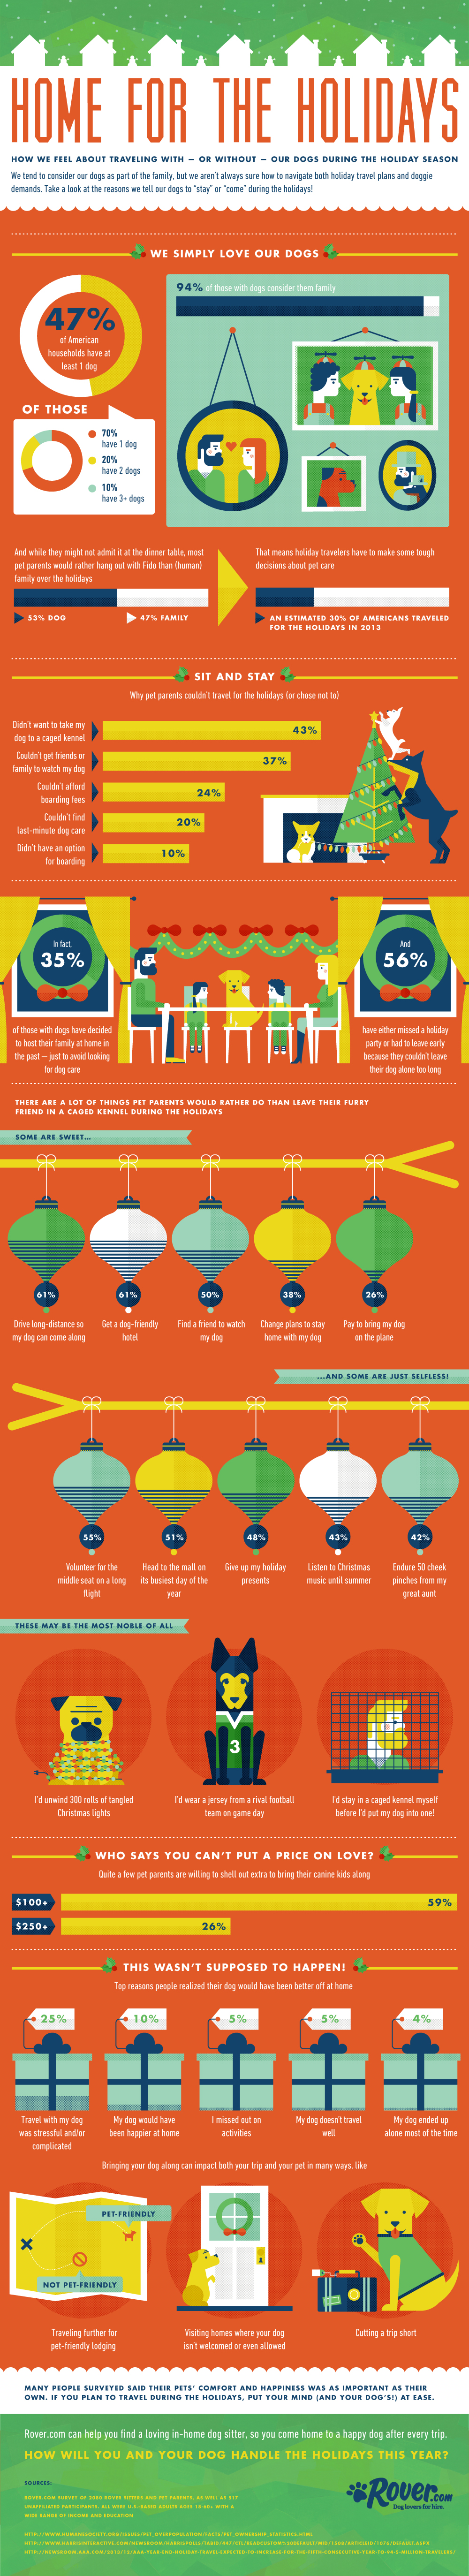 Rover holiday travel infographic